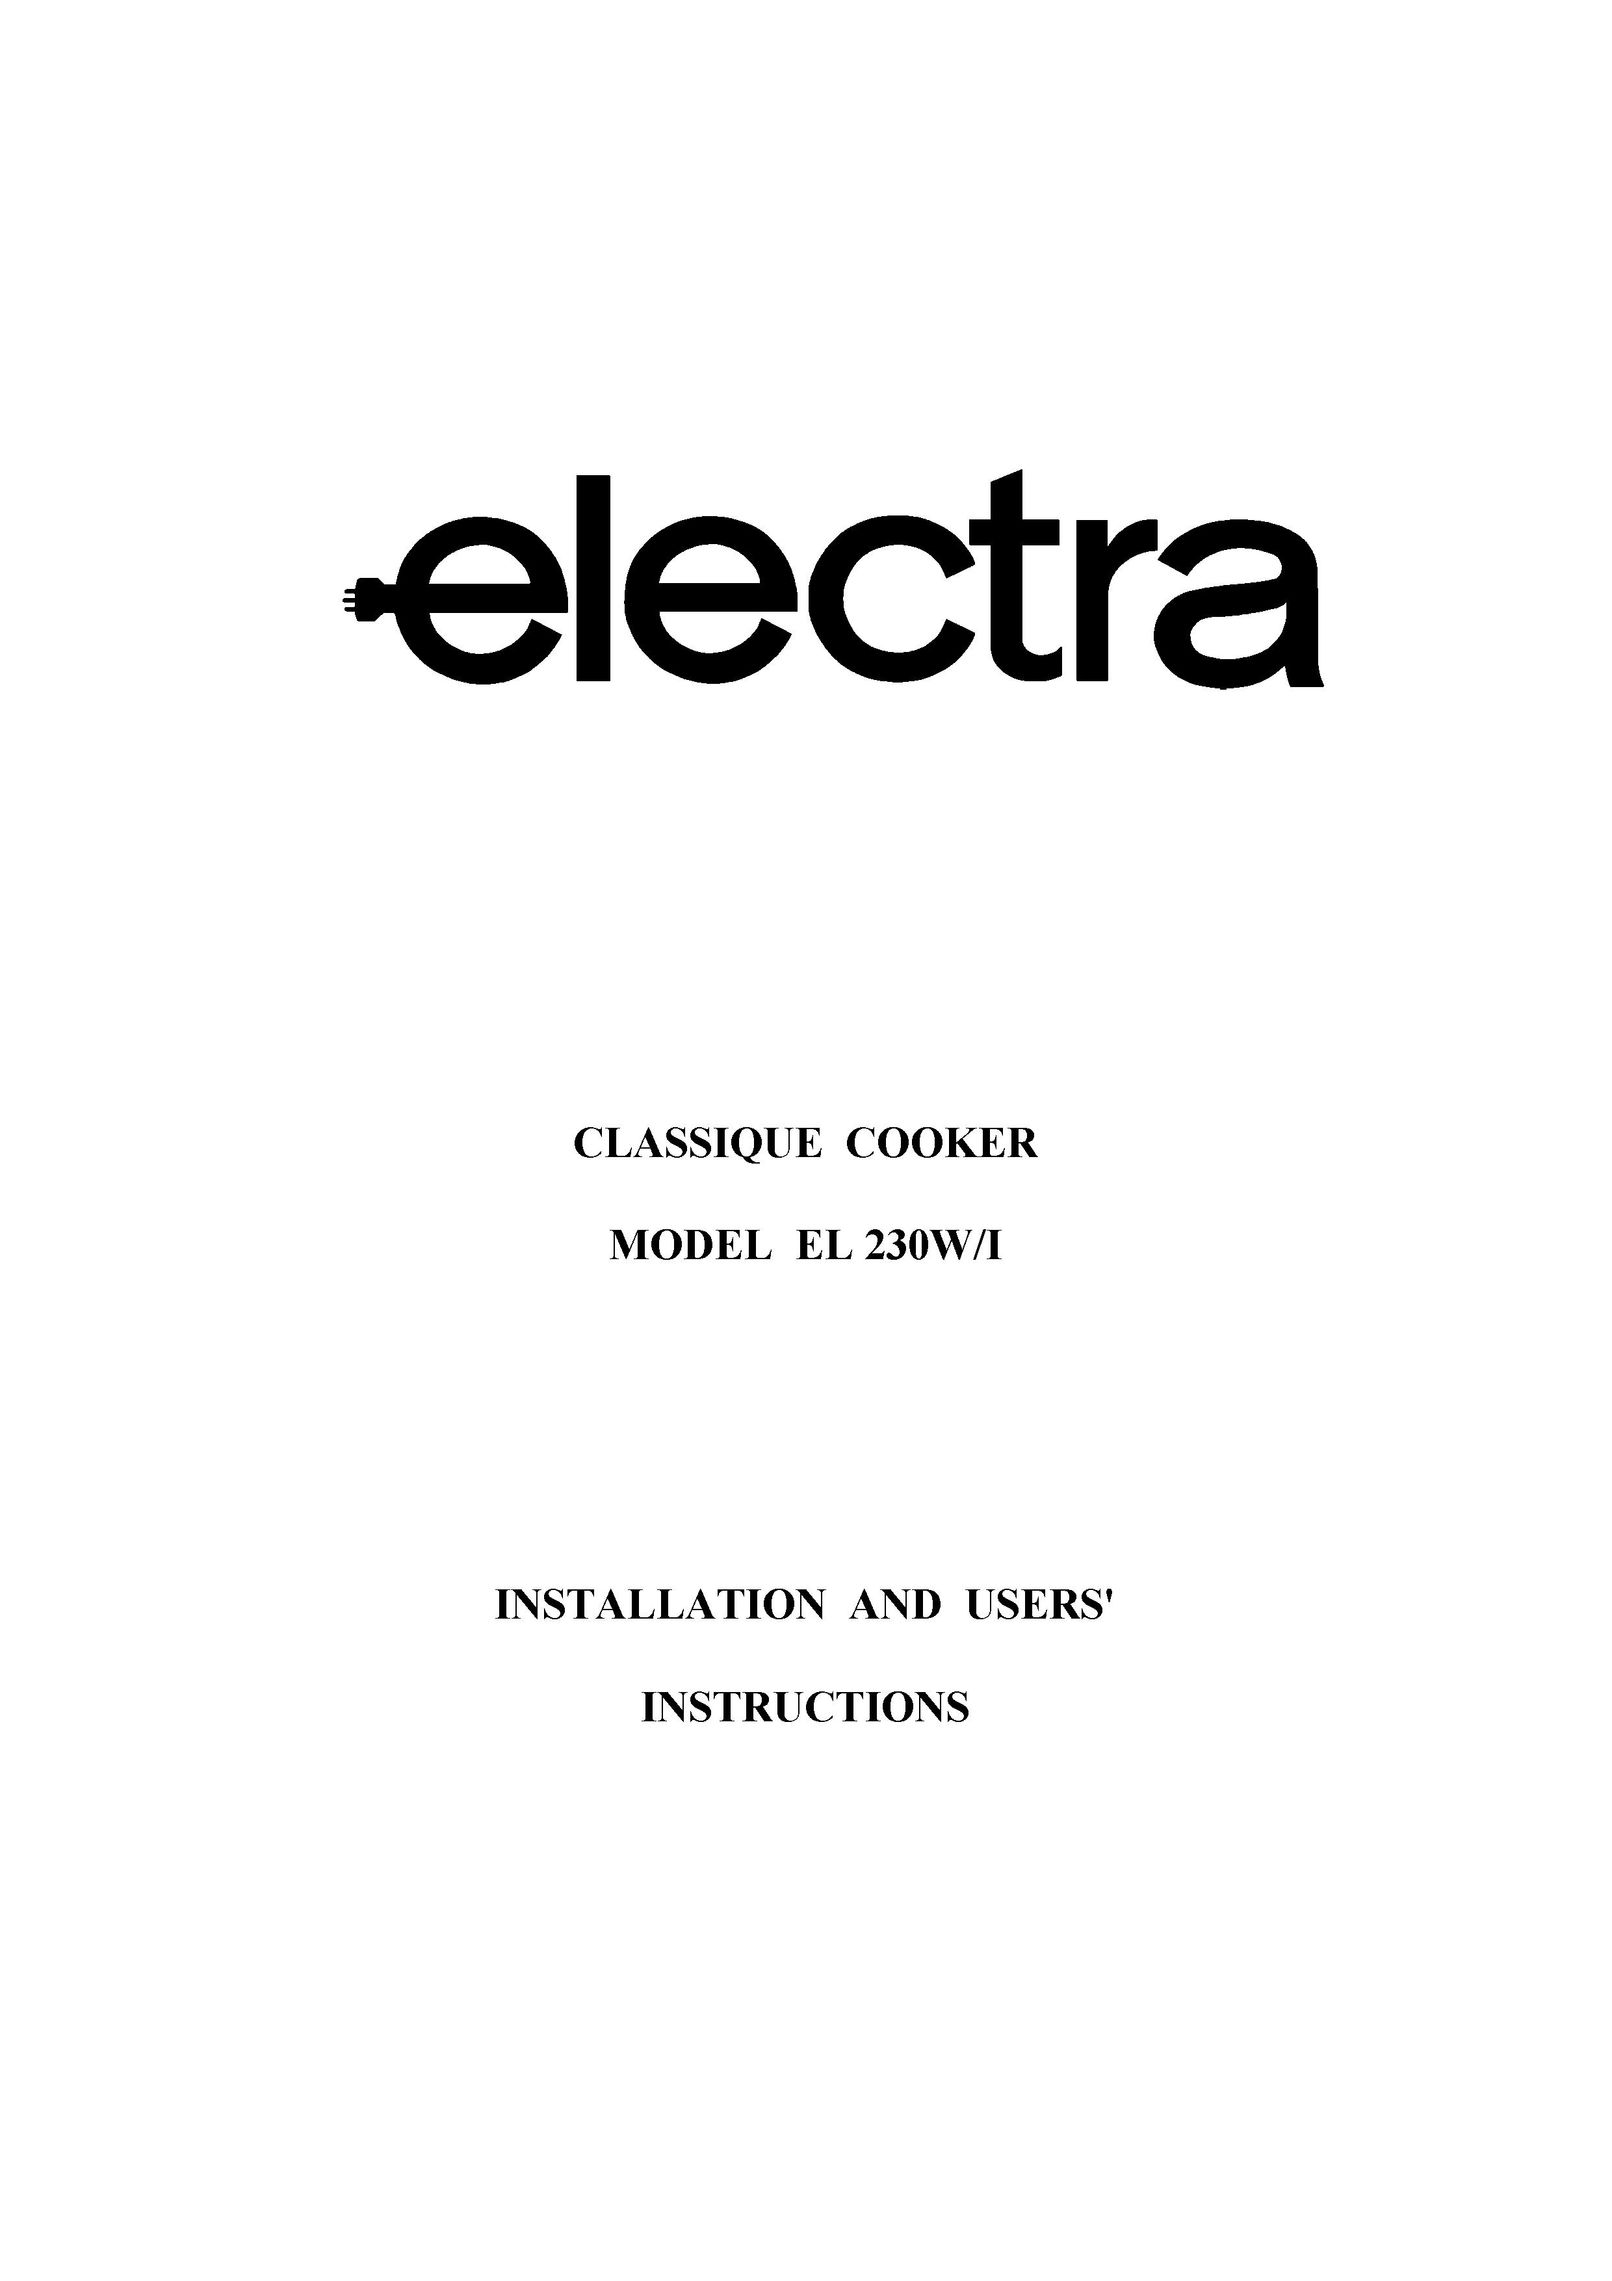 Electra Accessories 230W/I Cooktop User Manual